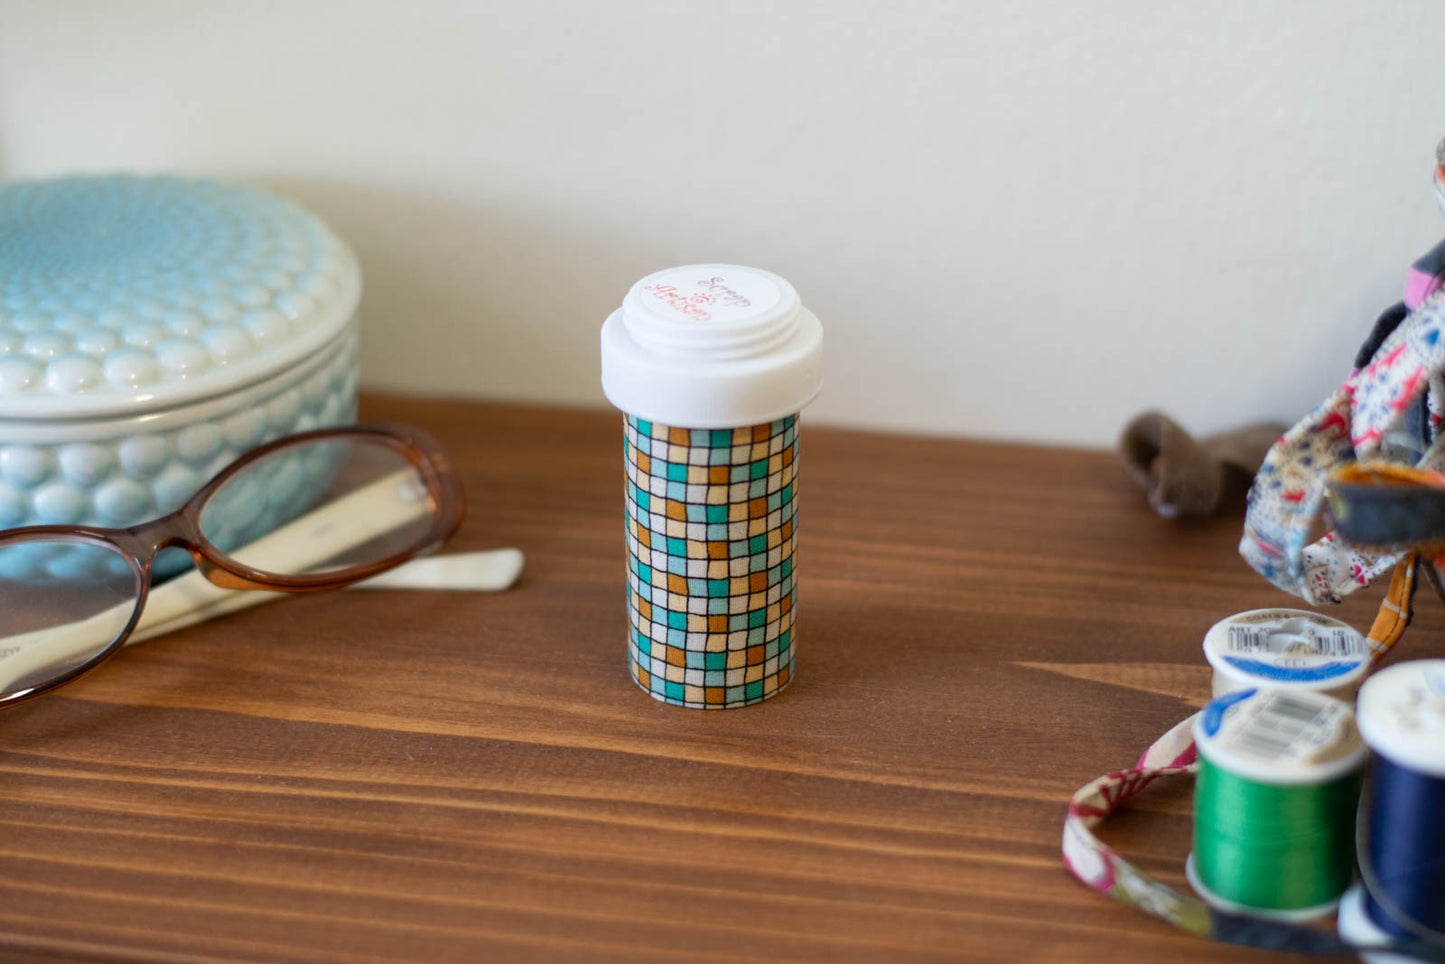 upcycled prescription bottle sewing kit — green and ochre tiles, closed, 3.25" high